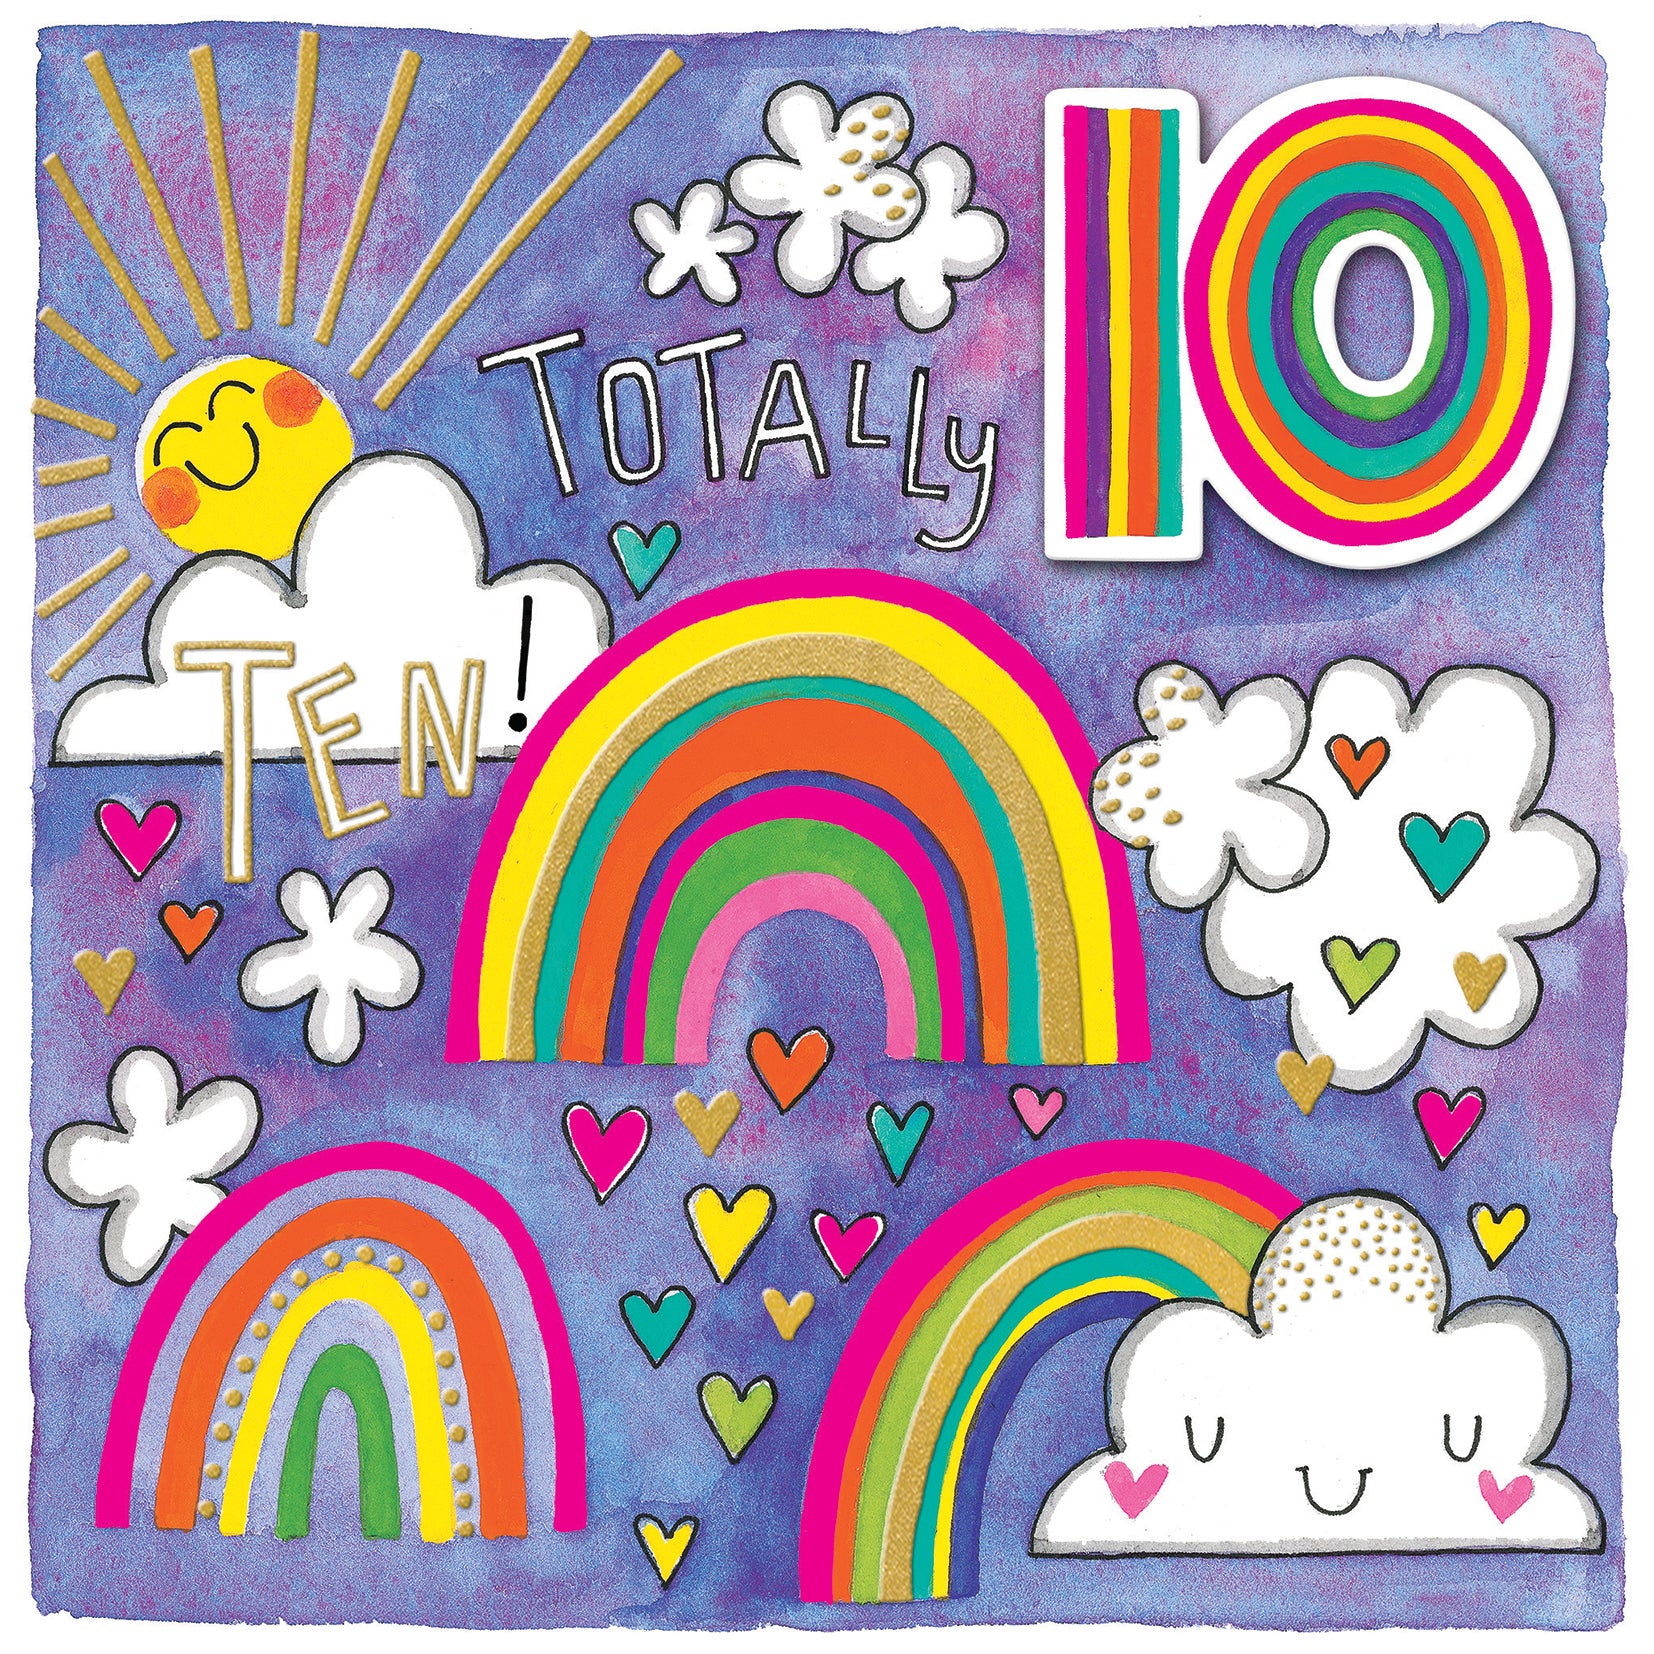 Totally 10 Rainbows Embellished Birthday Card from Penny Black